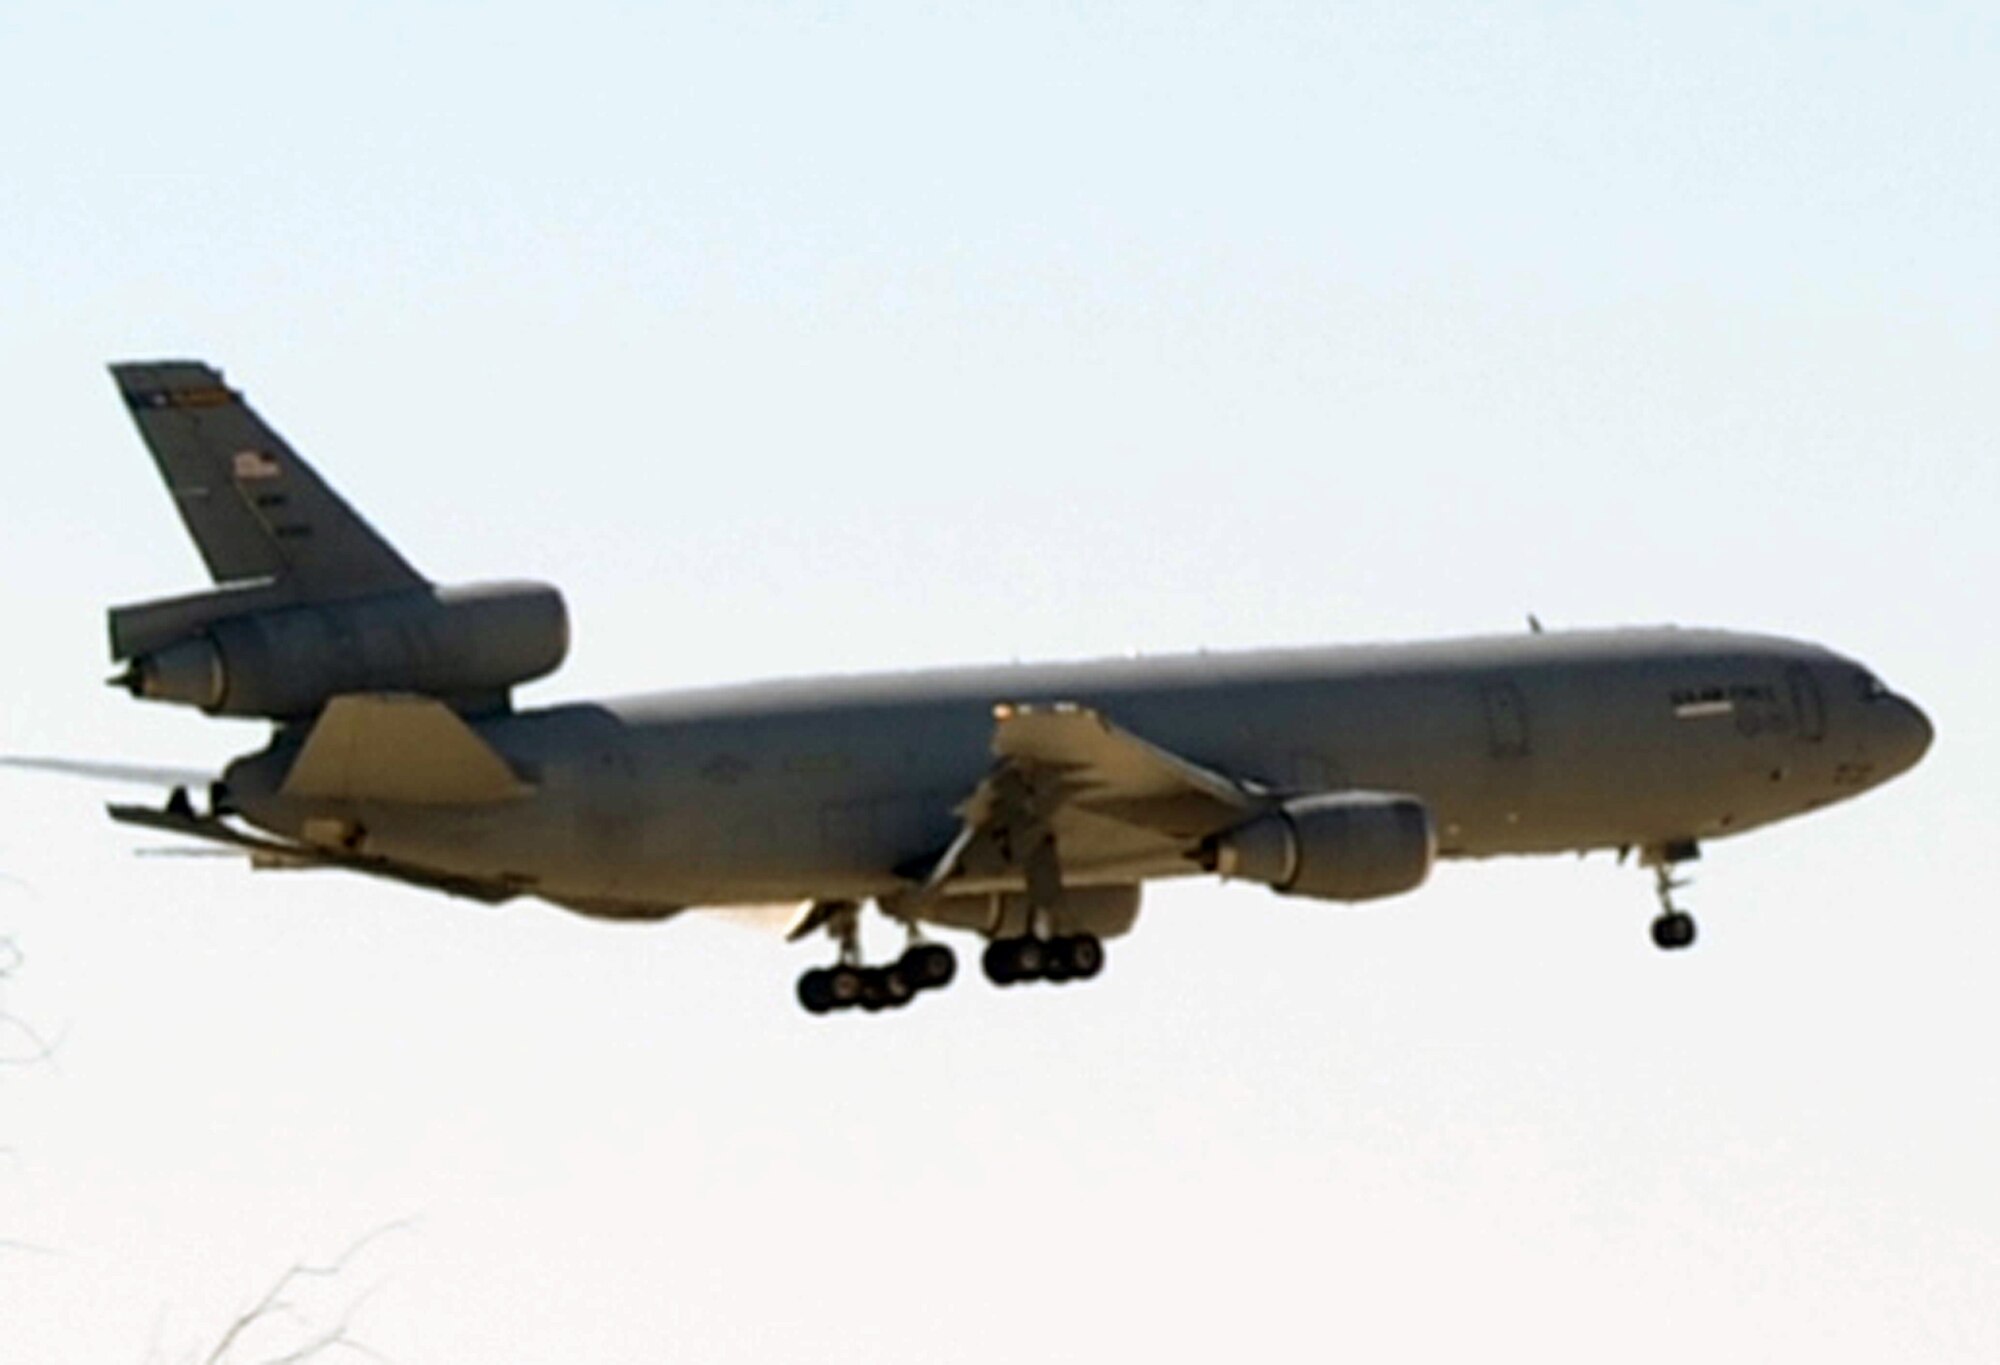 A KC-10 Extender comes in to land at a non-disclosed Southwest Asia base on Jan. 28, 2010, after completing a combat air refueling mission.  The KC-10 is assigned to the 908th Expeditionary Air Refueling Squadron of the 380th Air Expeditionary Wing. (U.S. Air Force Photo/Tech. Sgt. Scott T. Sturkol/Released)